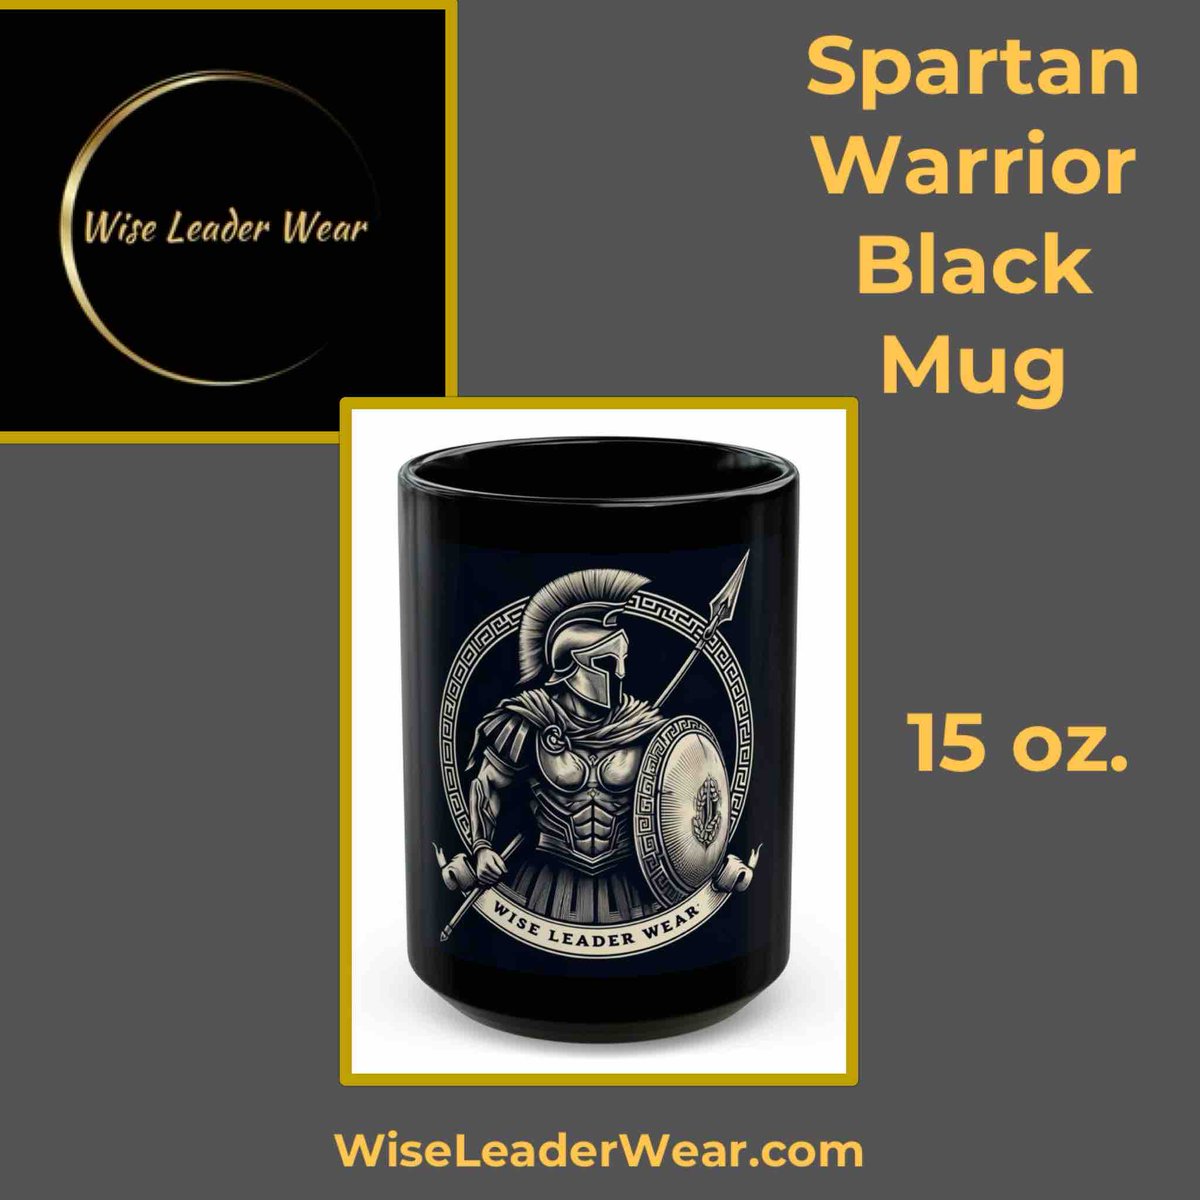 Brand new mug in the Wise Leader line! The Spartan mug is 15 oz and looks amazing! available on wiseleaderwear.com! Order now with promo code GRANDOPENING!